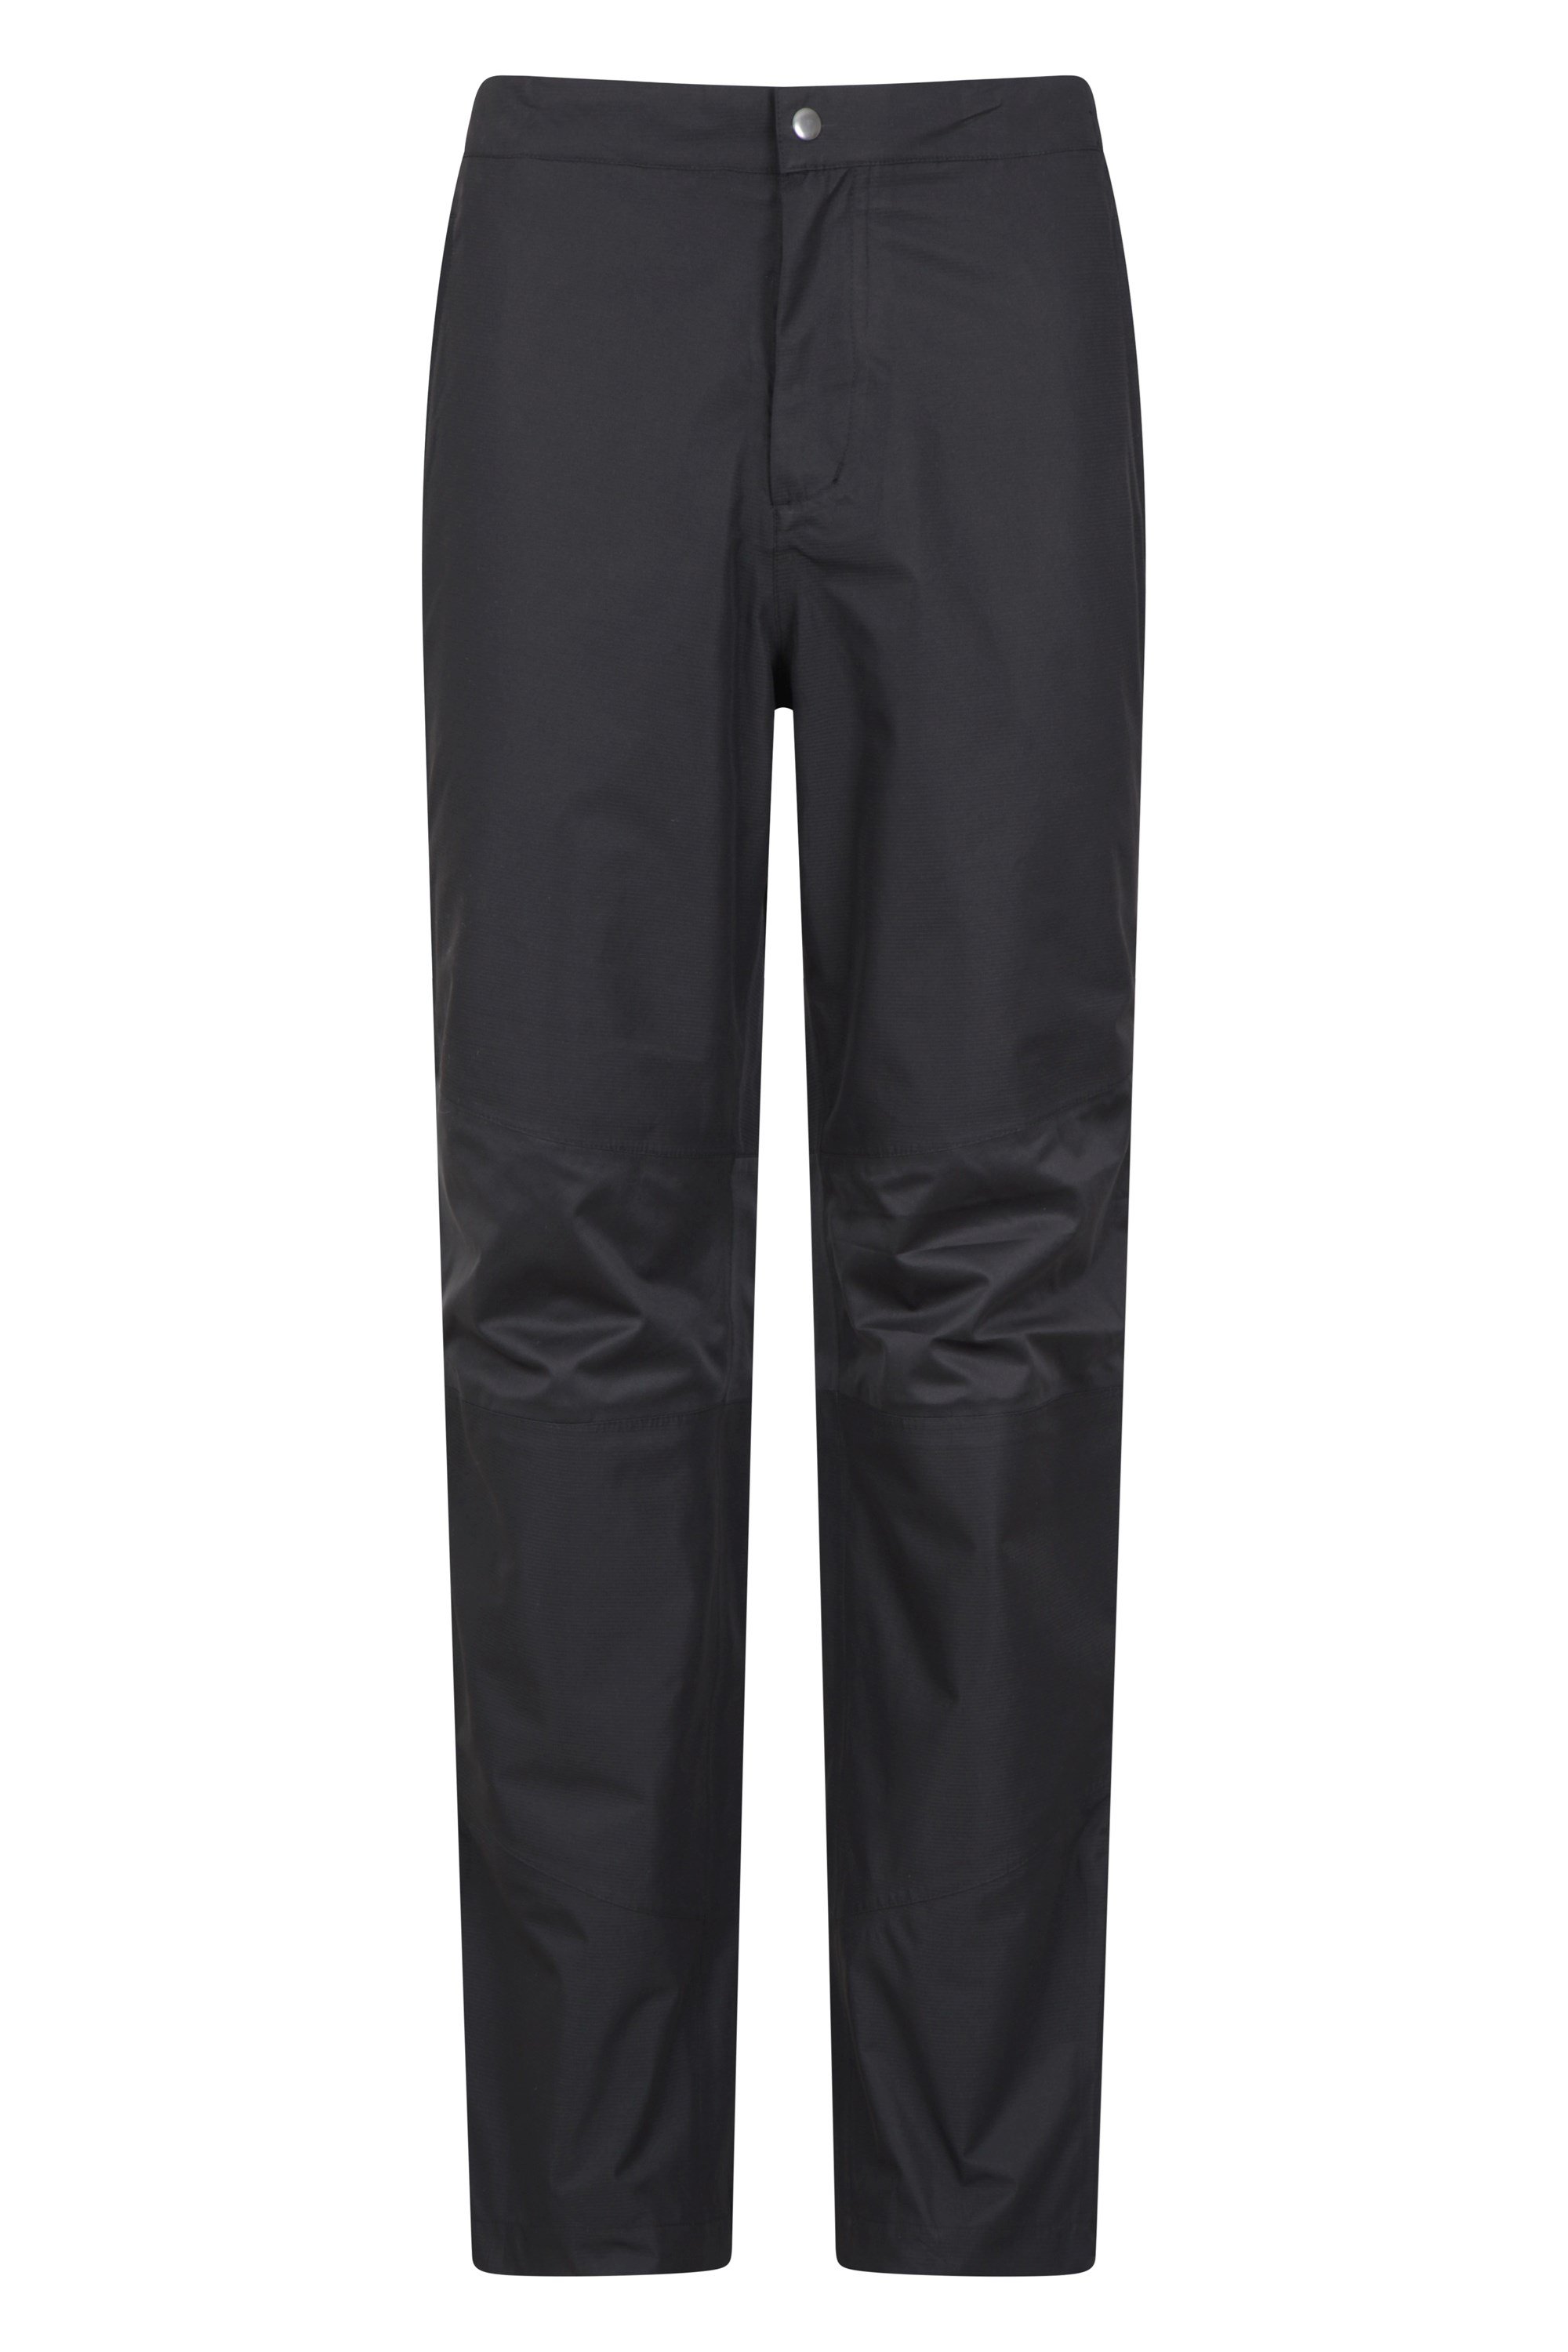 Men's Waterproof Trousers and Overtrousers – Montane - US